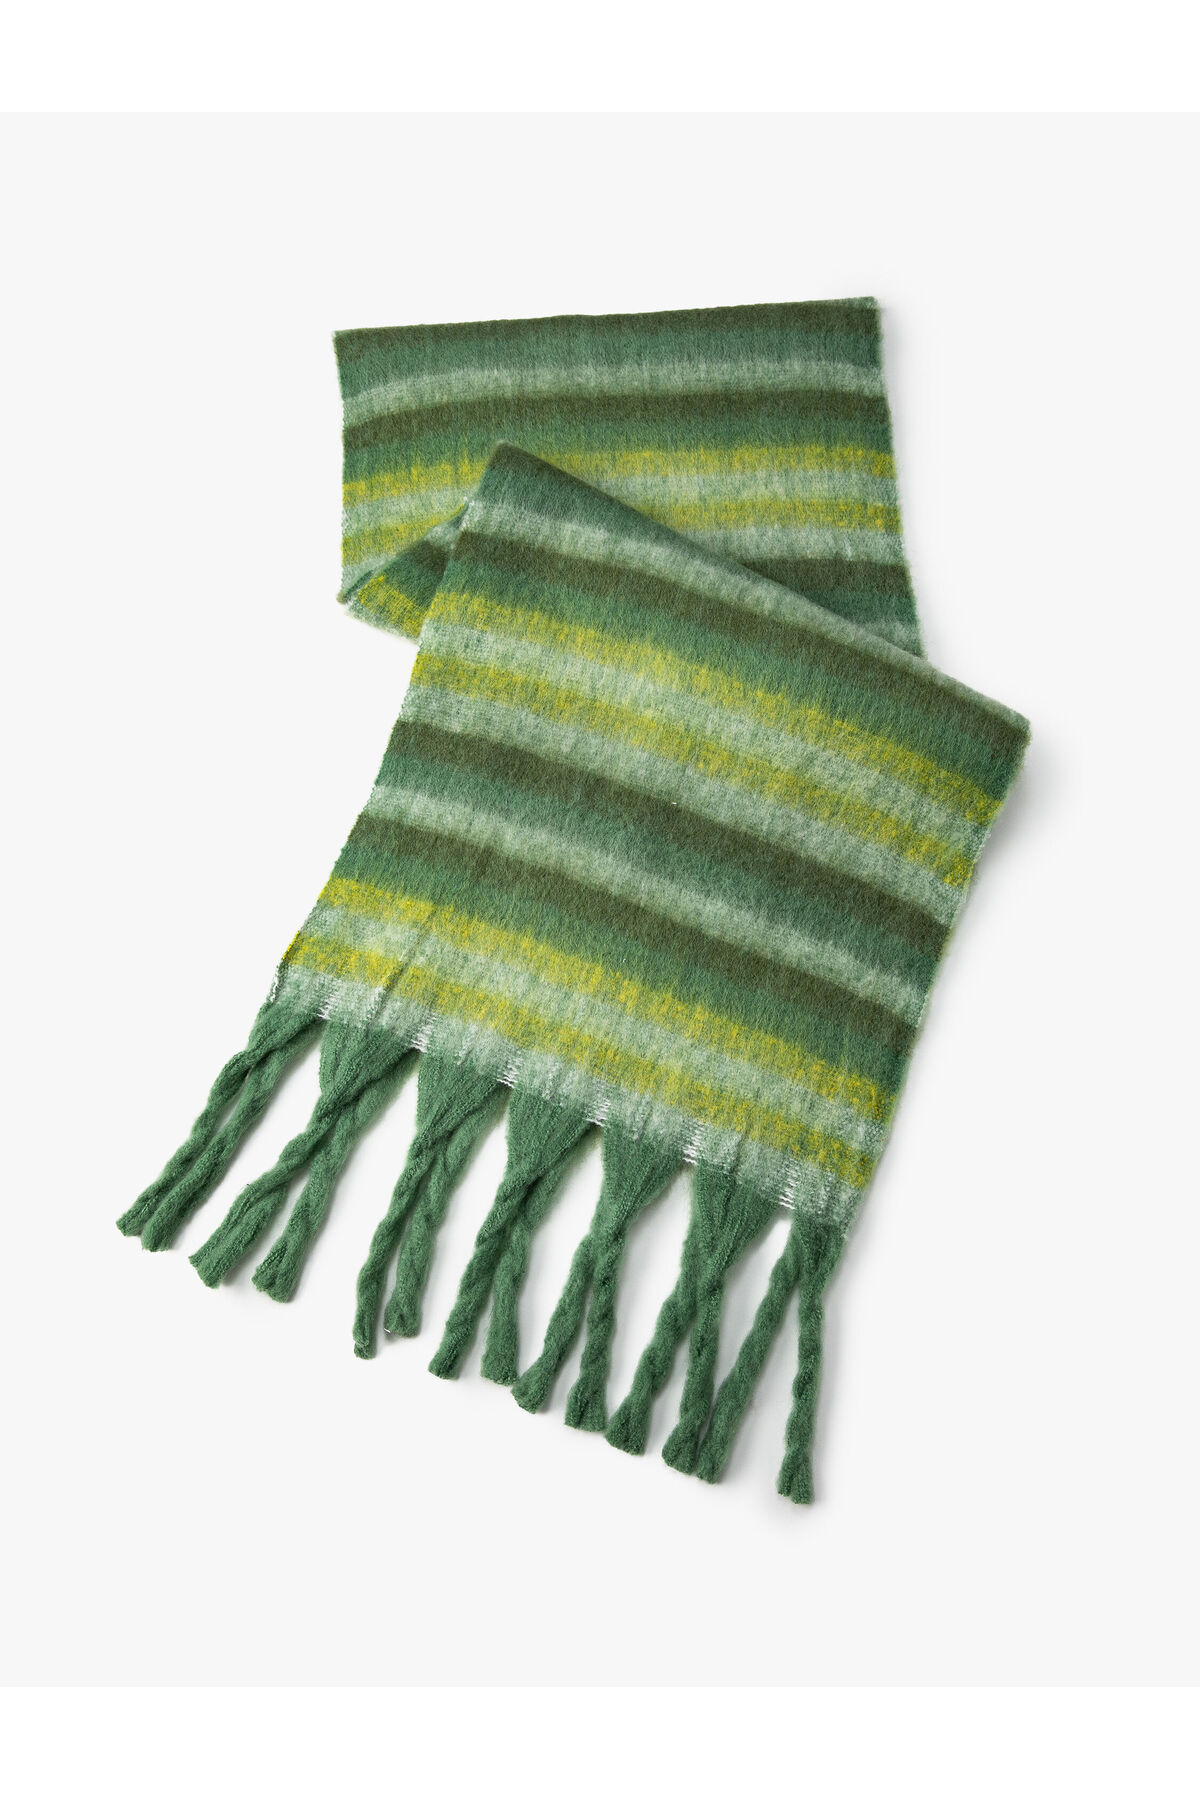 Koton Striped Scarf Multicolored Soft Textured Tassels